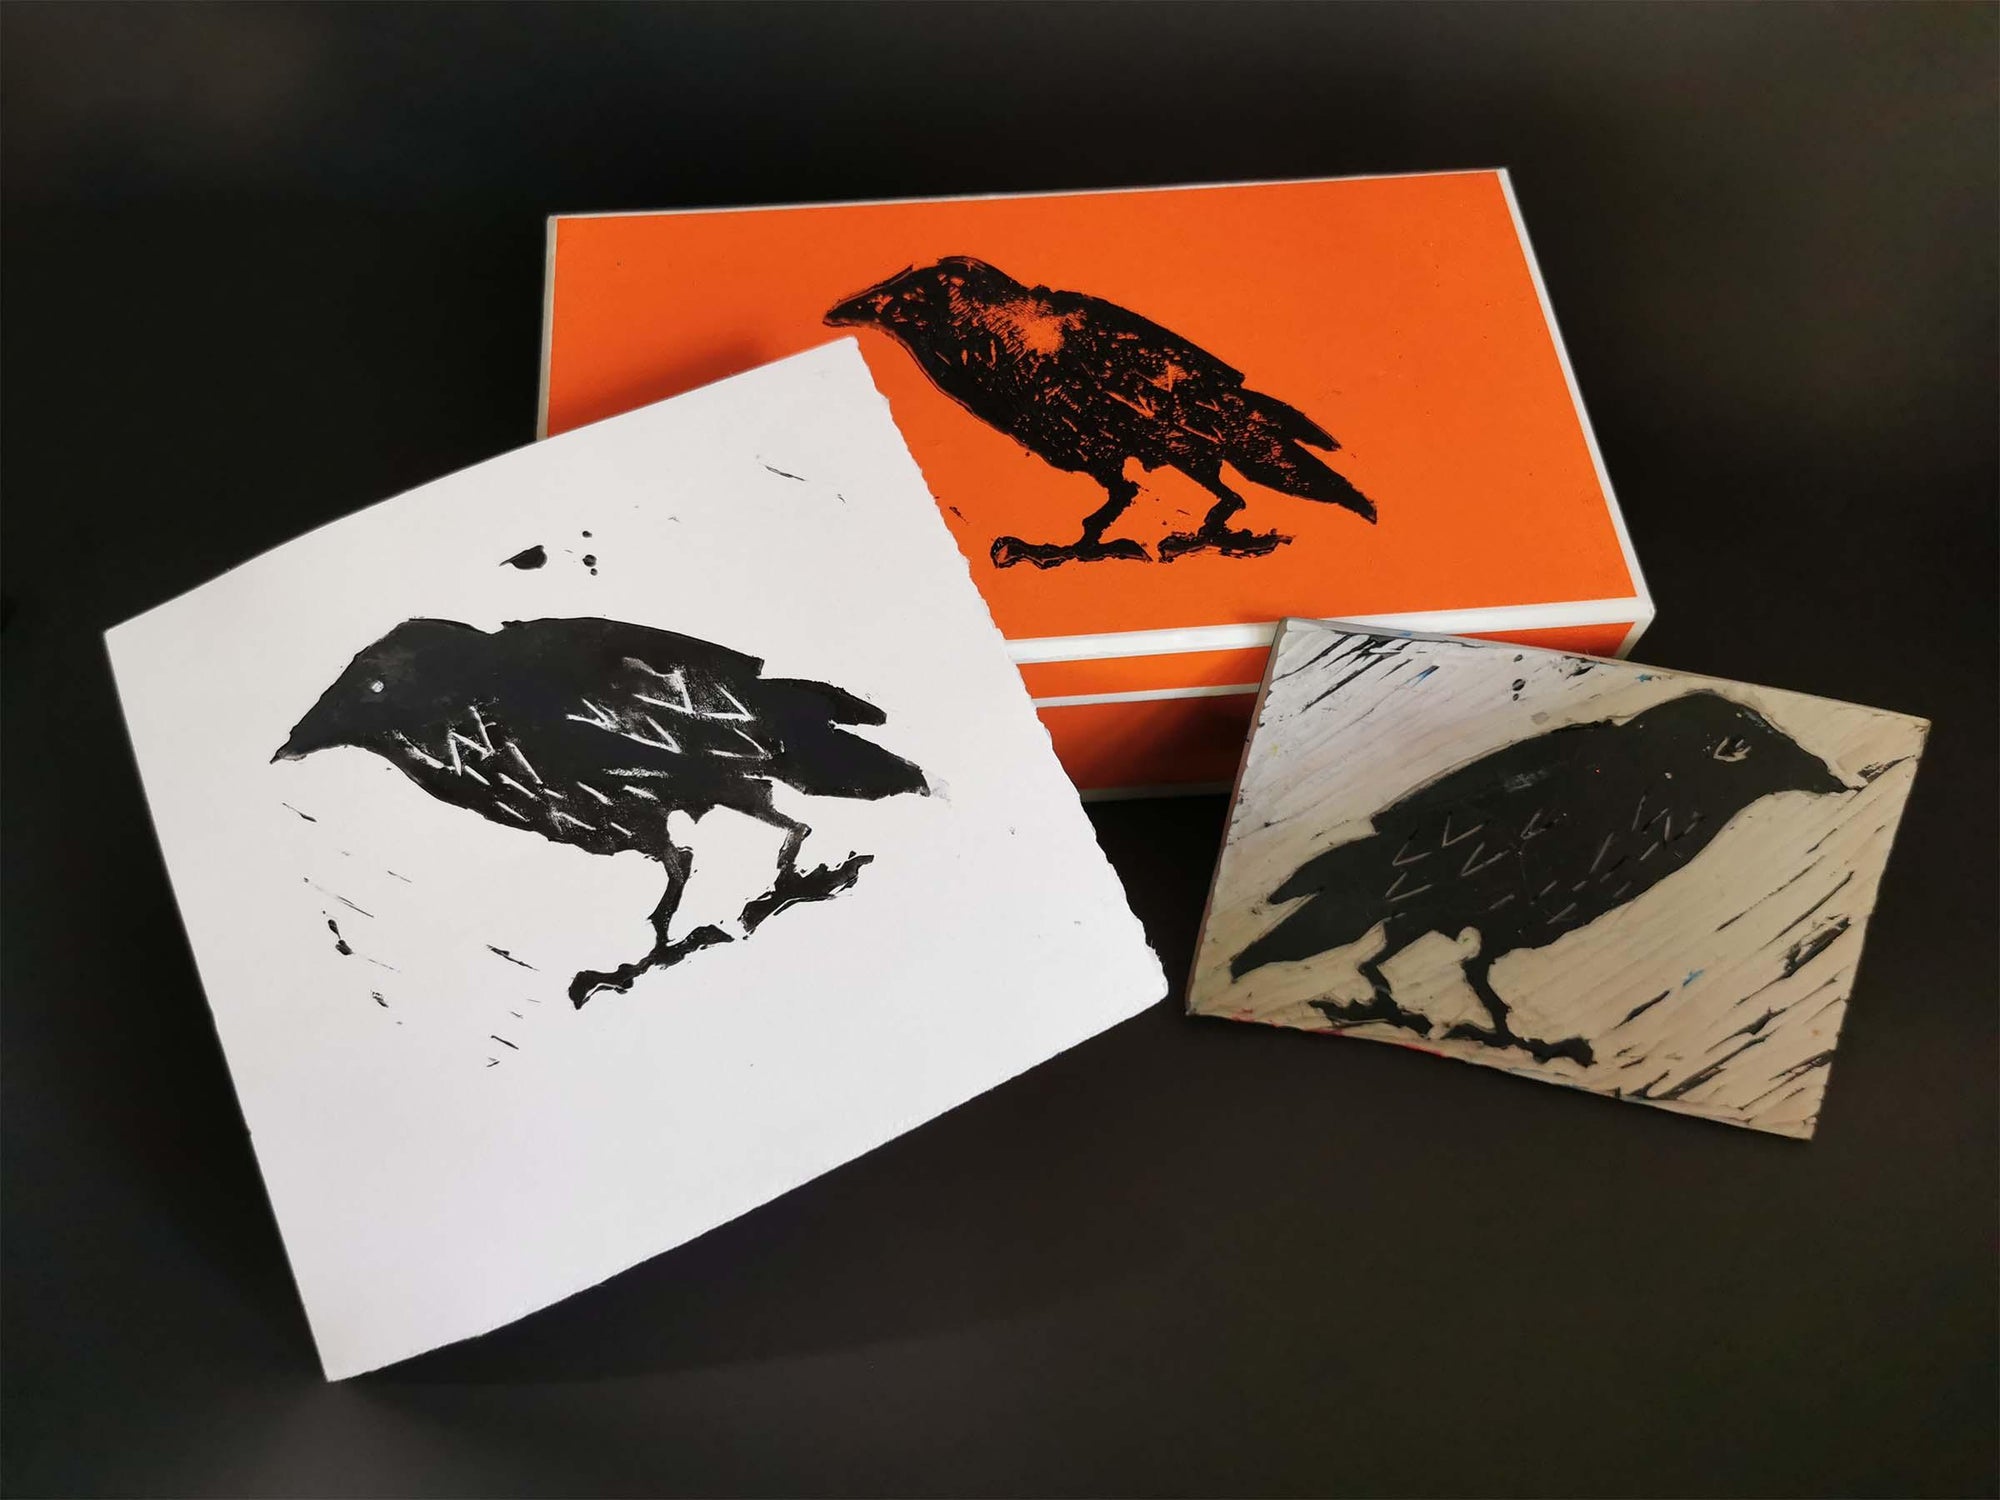 Crow pint on paper and on a orange box